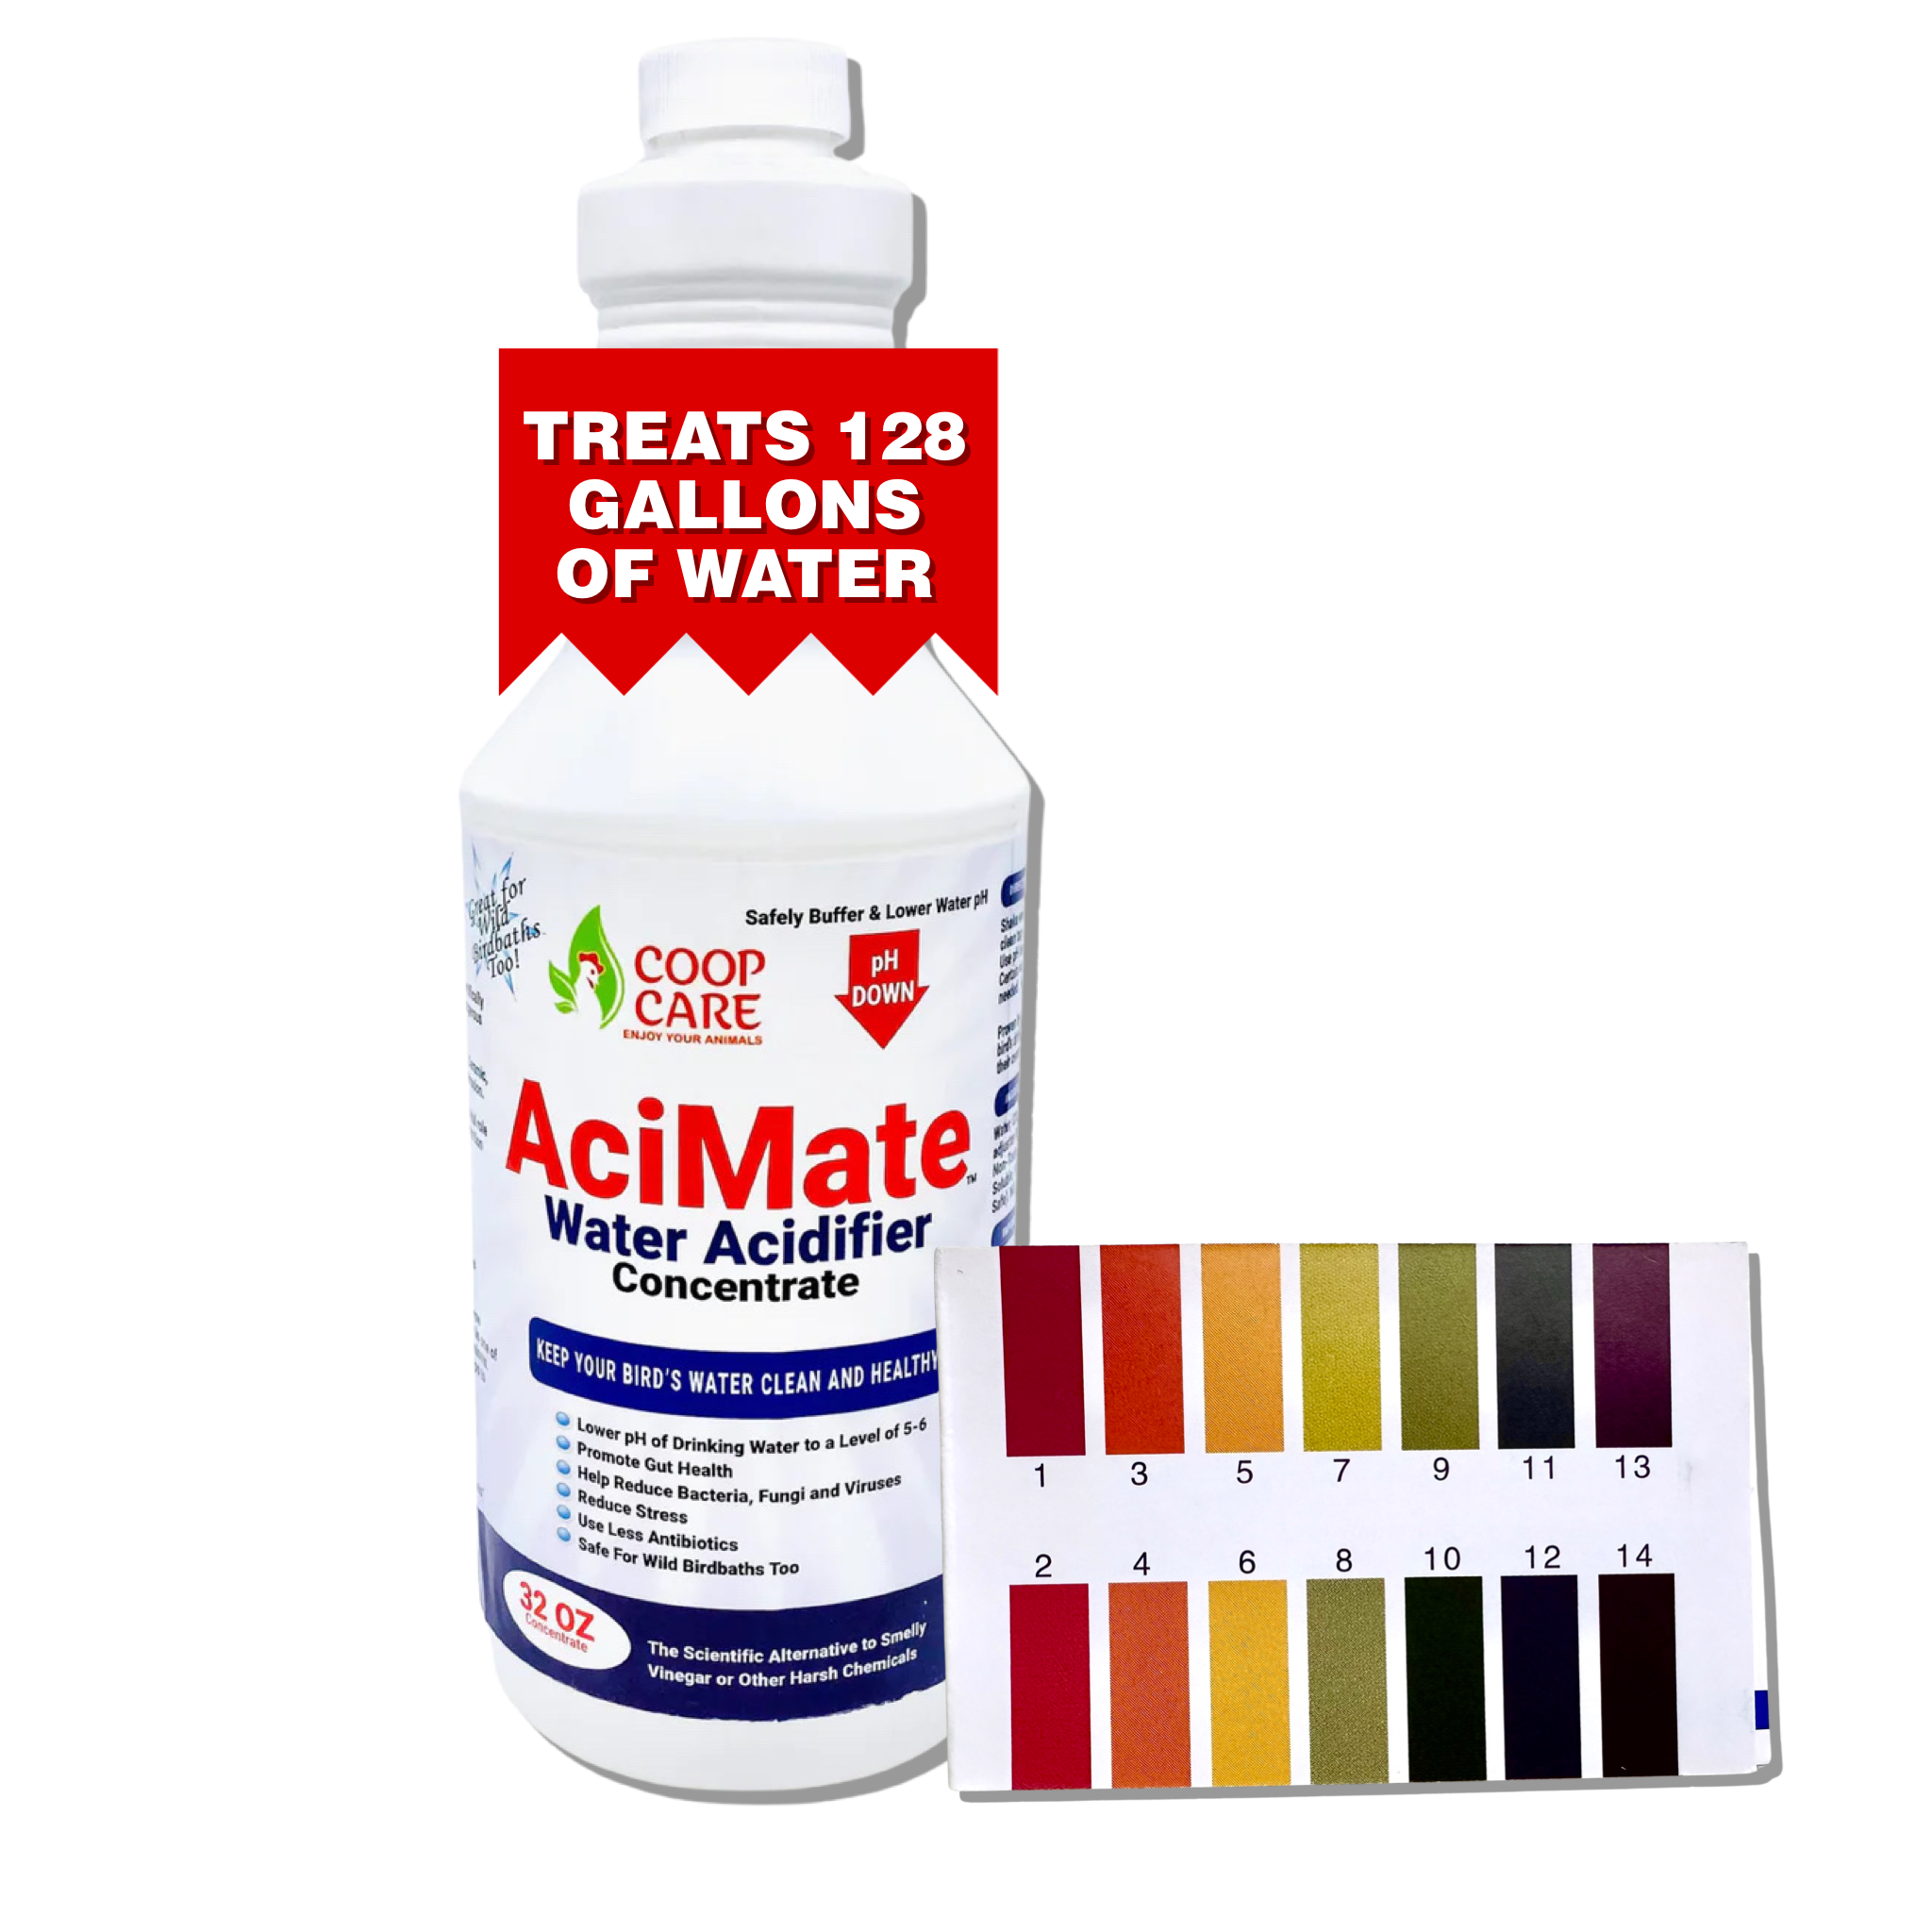 AciMate Water Acidifier Concentrate (32oz) – Water Quality is Essential to Poultry Health. Optimize Water pH, Eliminate BioFilm & Algae Growth in Your Waterers. 10x Stronger than Apple Cider Vinegar! Pleasant Taste. Free pH test strips included!